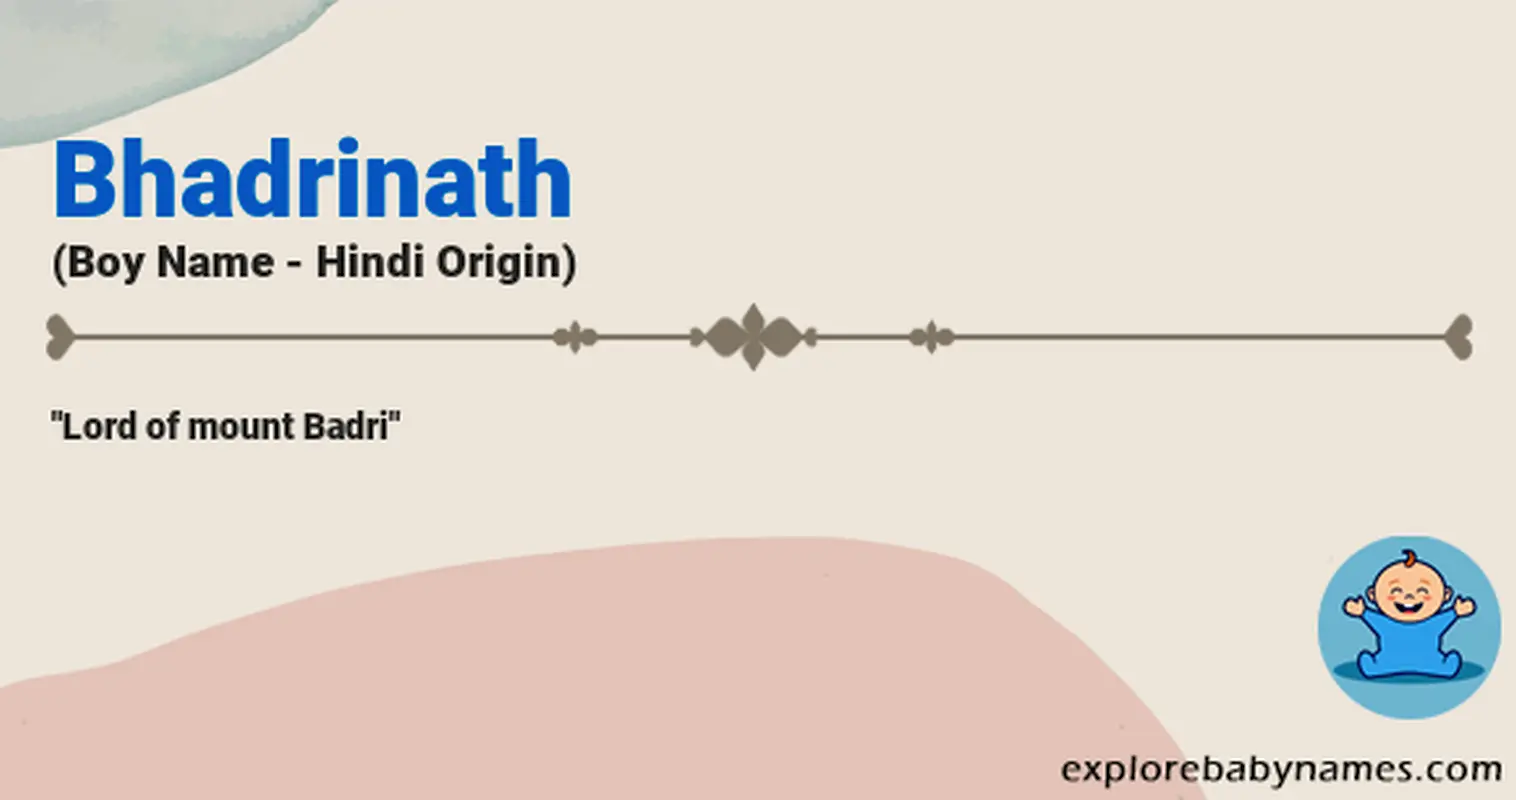 Meaning of Bhadrinath